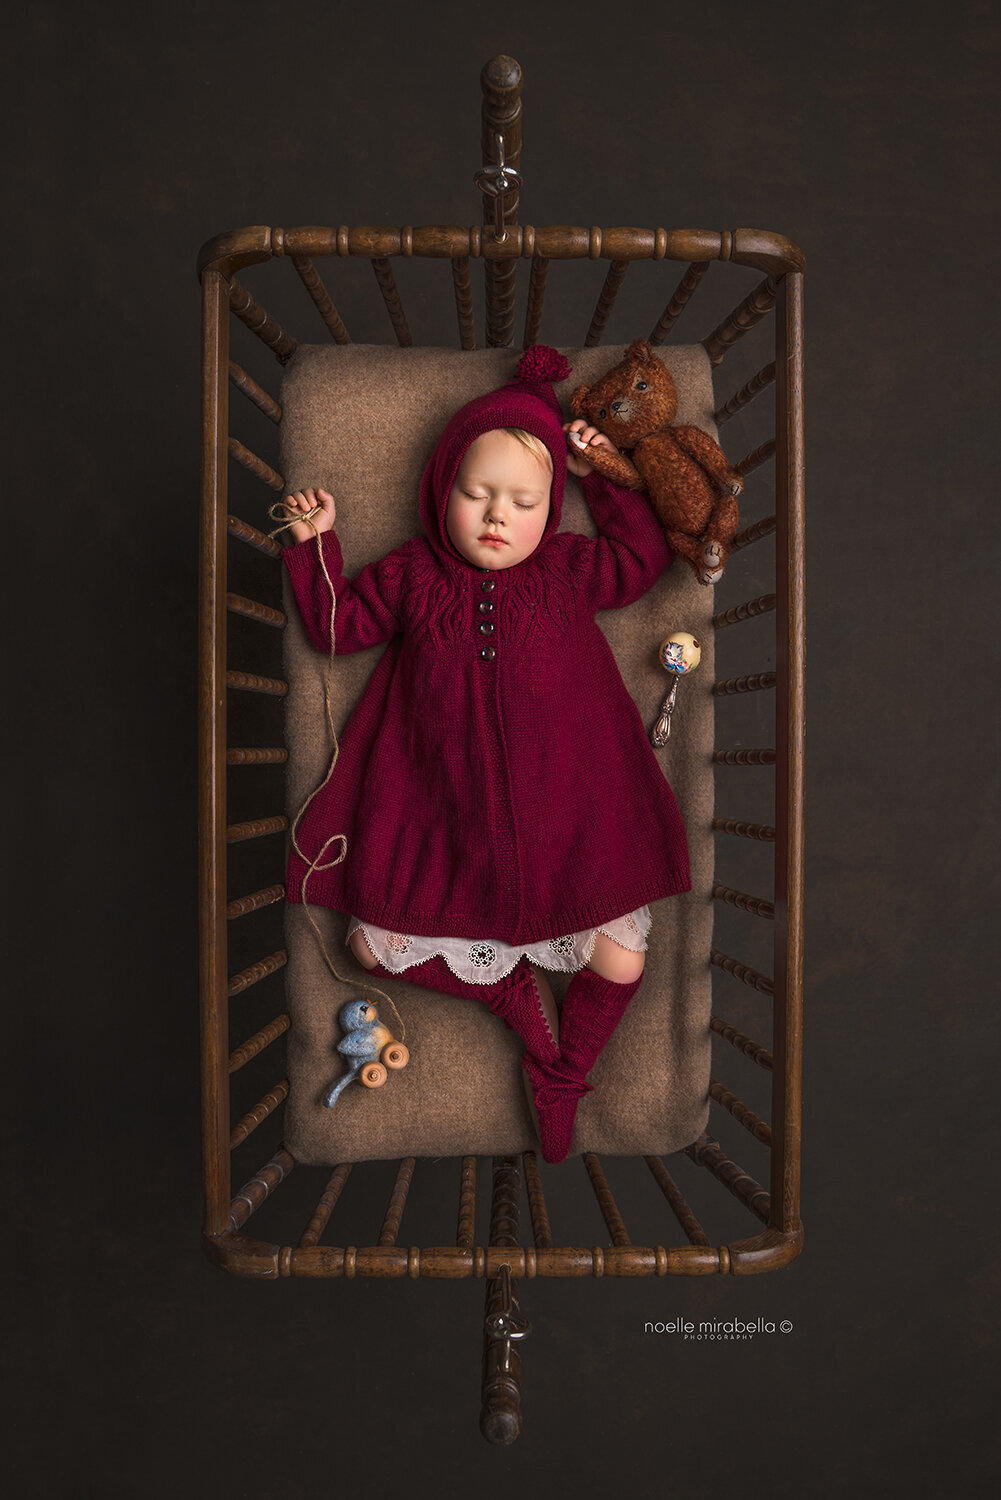 Toddler baby in red knits sleeping in vintage Jenny Lind cradle.